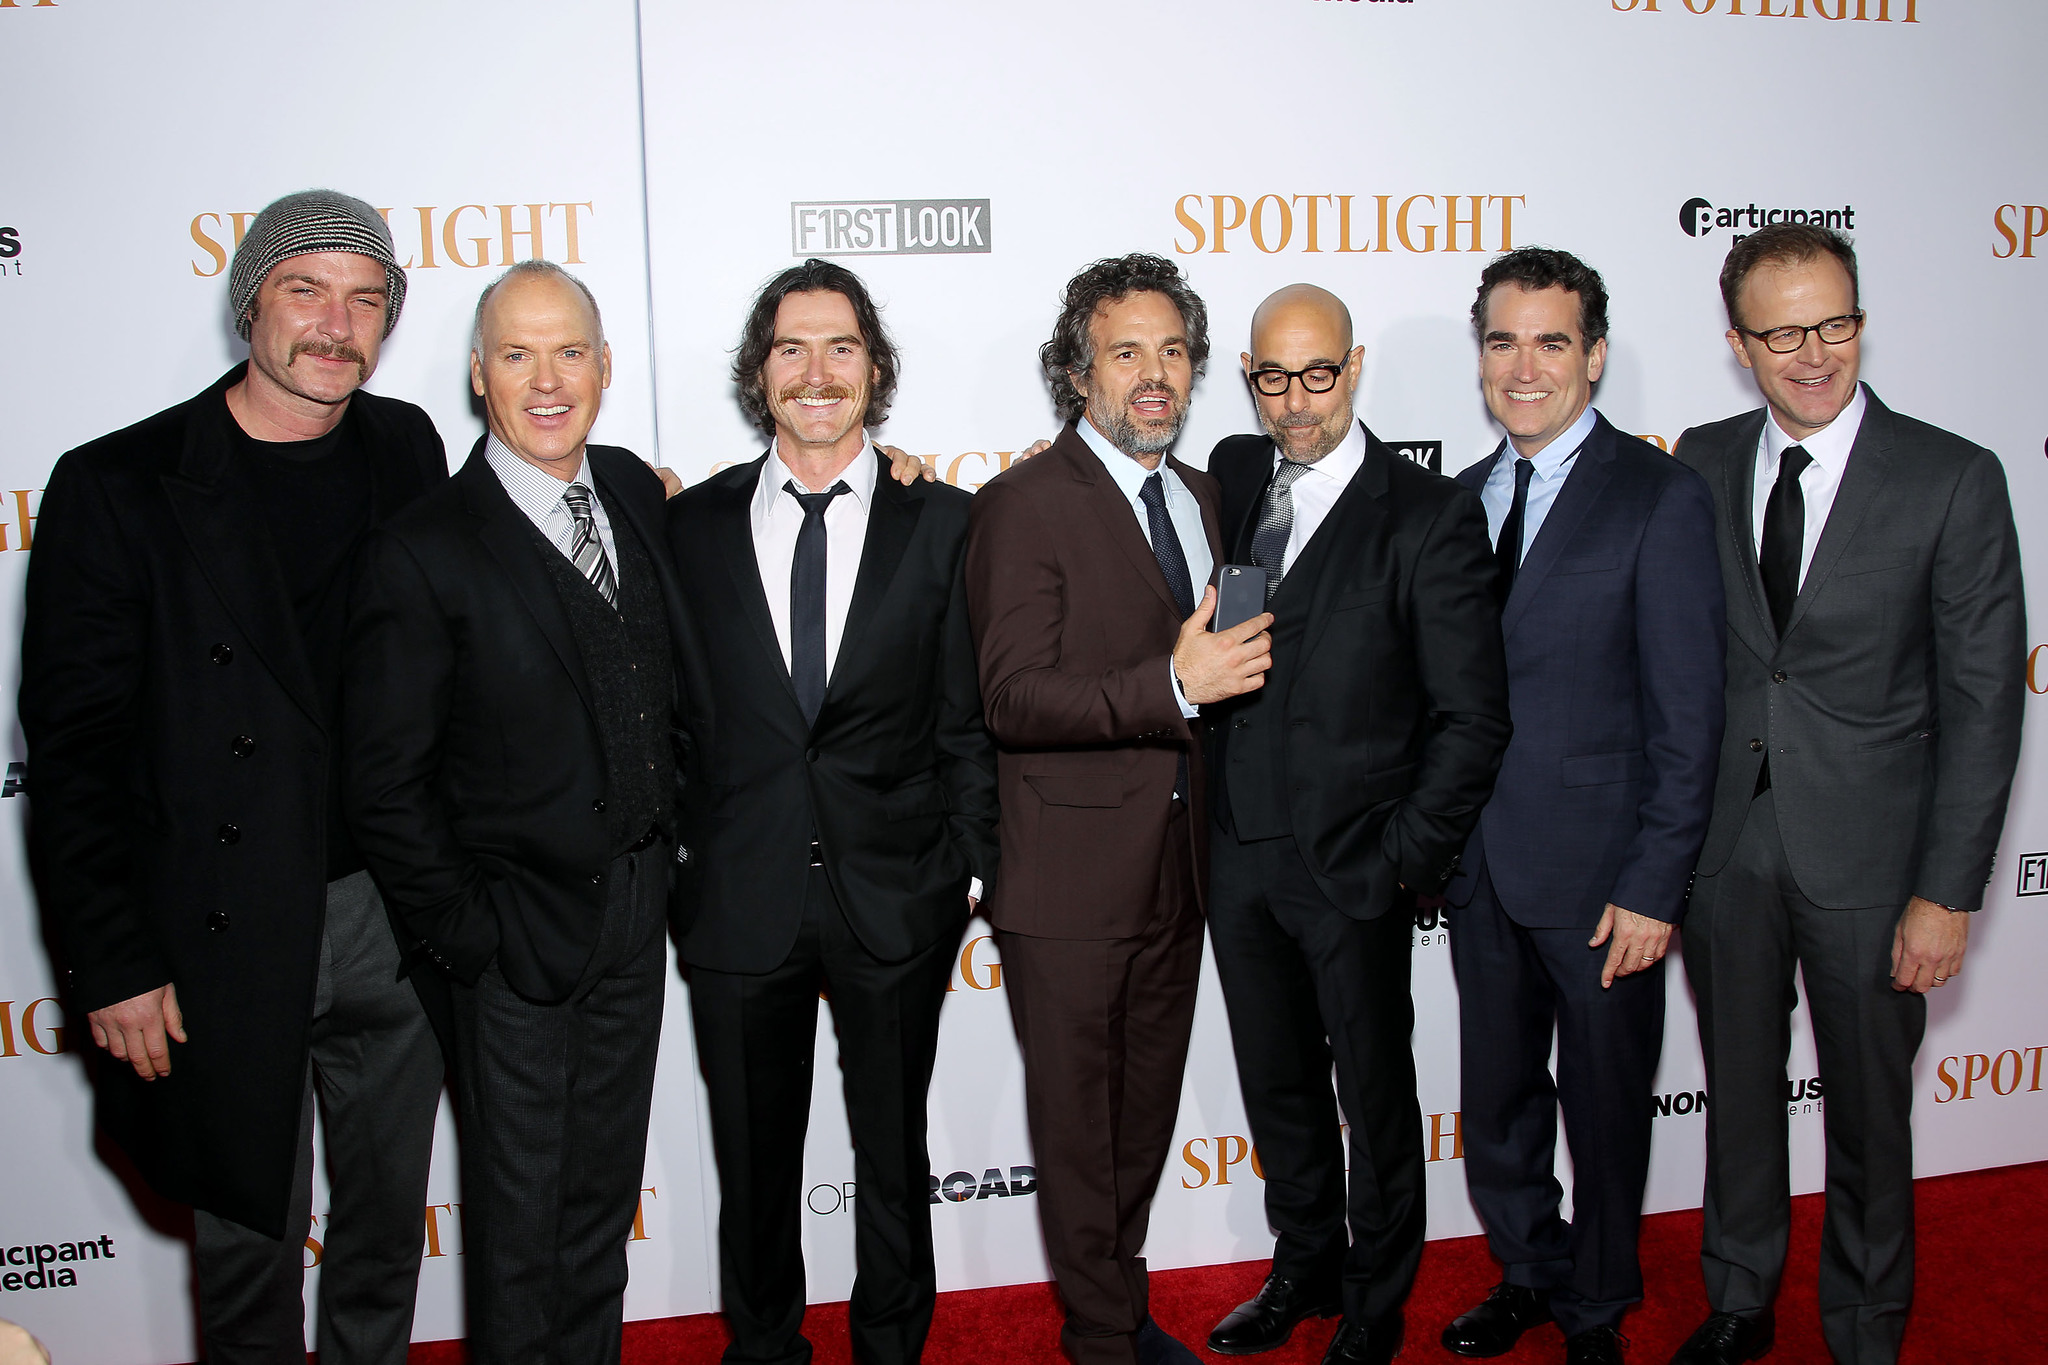 Michael Keaton, Liev Schreiber, Billy Crudup, Stanley Tucci, Brian d'Arcy James, Tom McCarthy, Mark Ruffalo and Brian D'Arcy at event of Spotlight (2015)